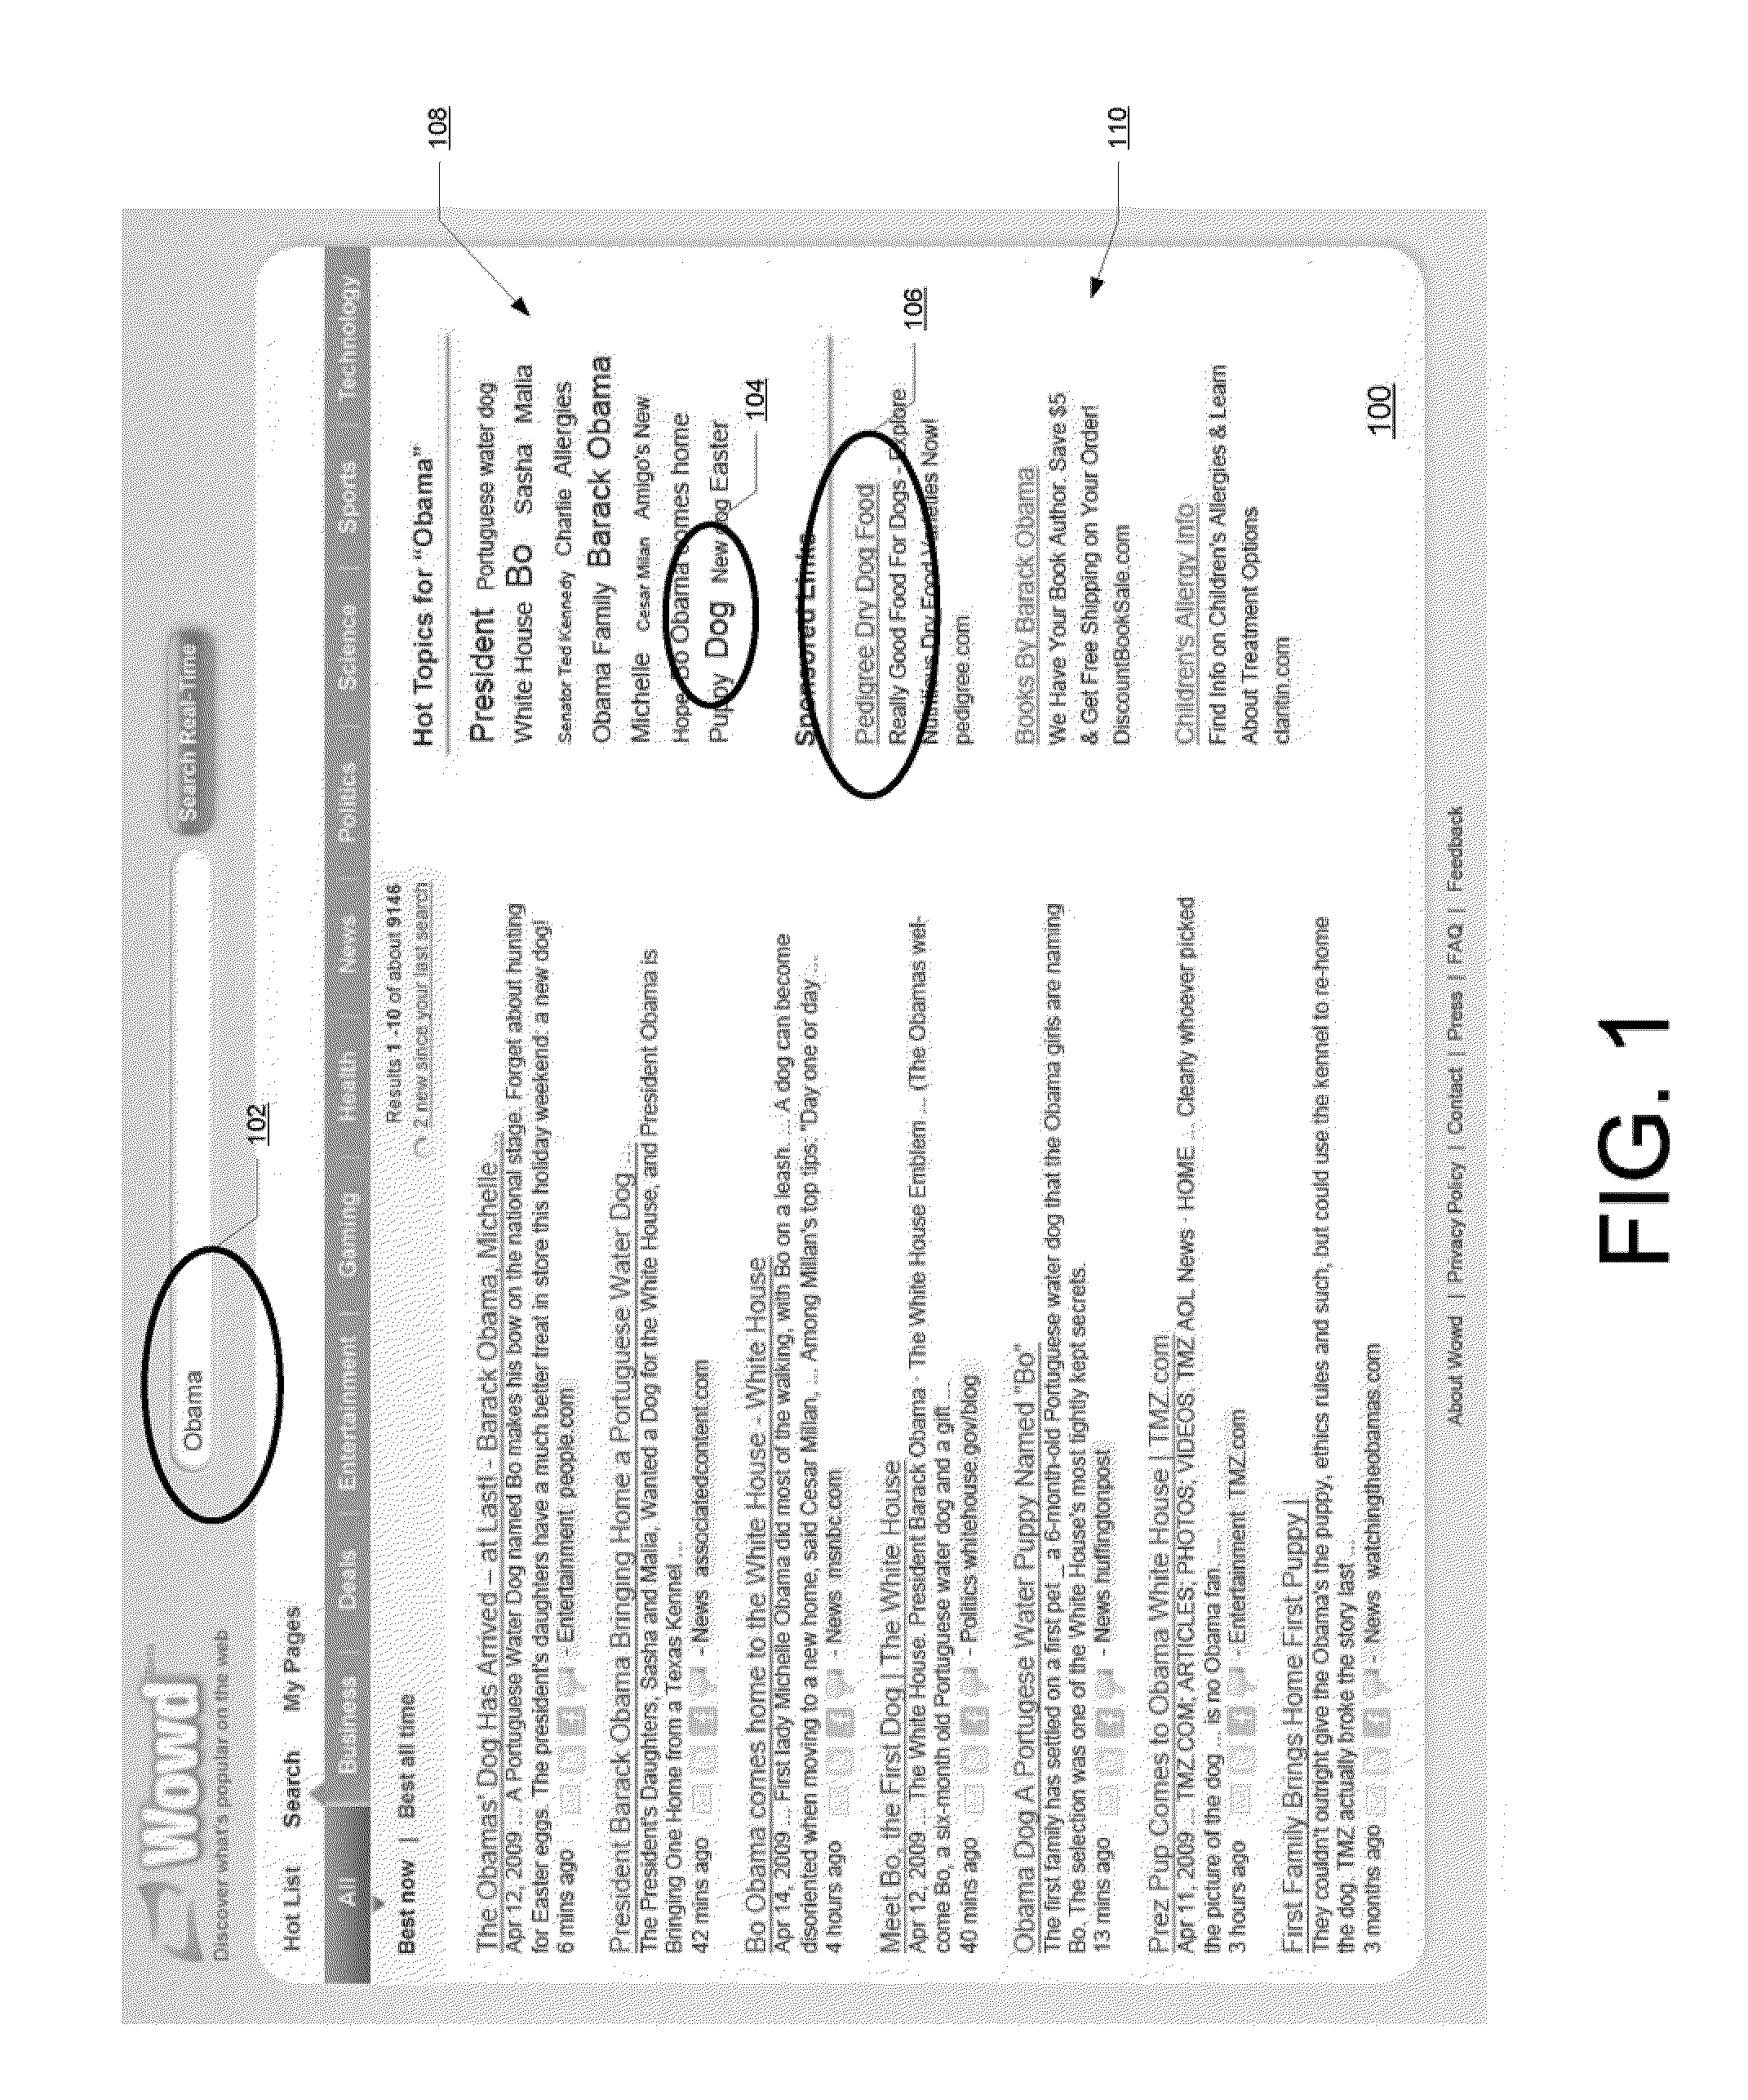 System and method for using real-time keywords for targeting advertising in web search and social media